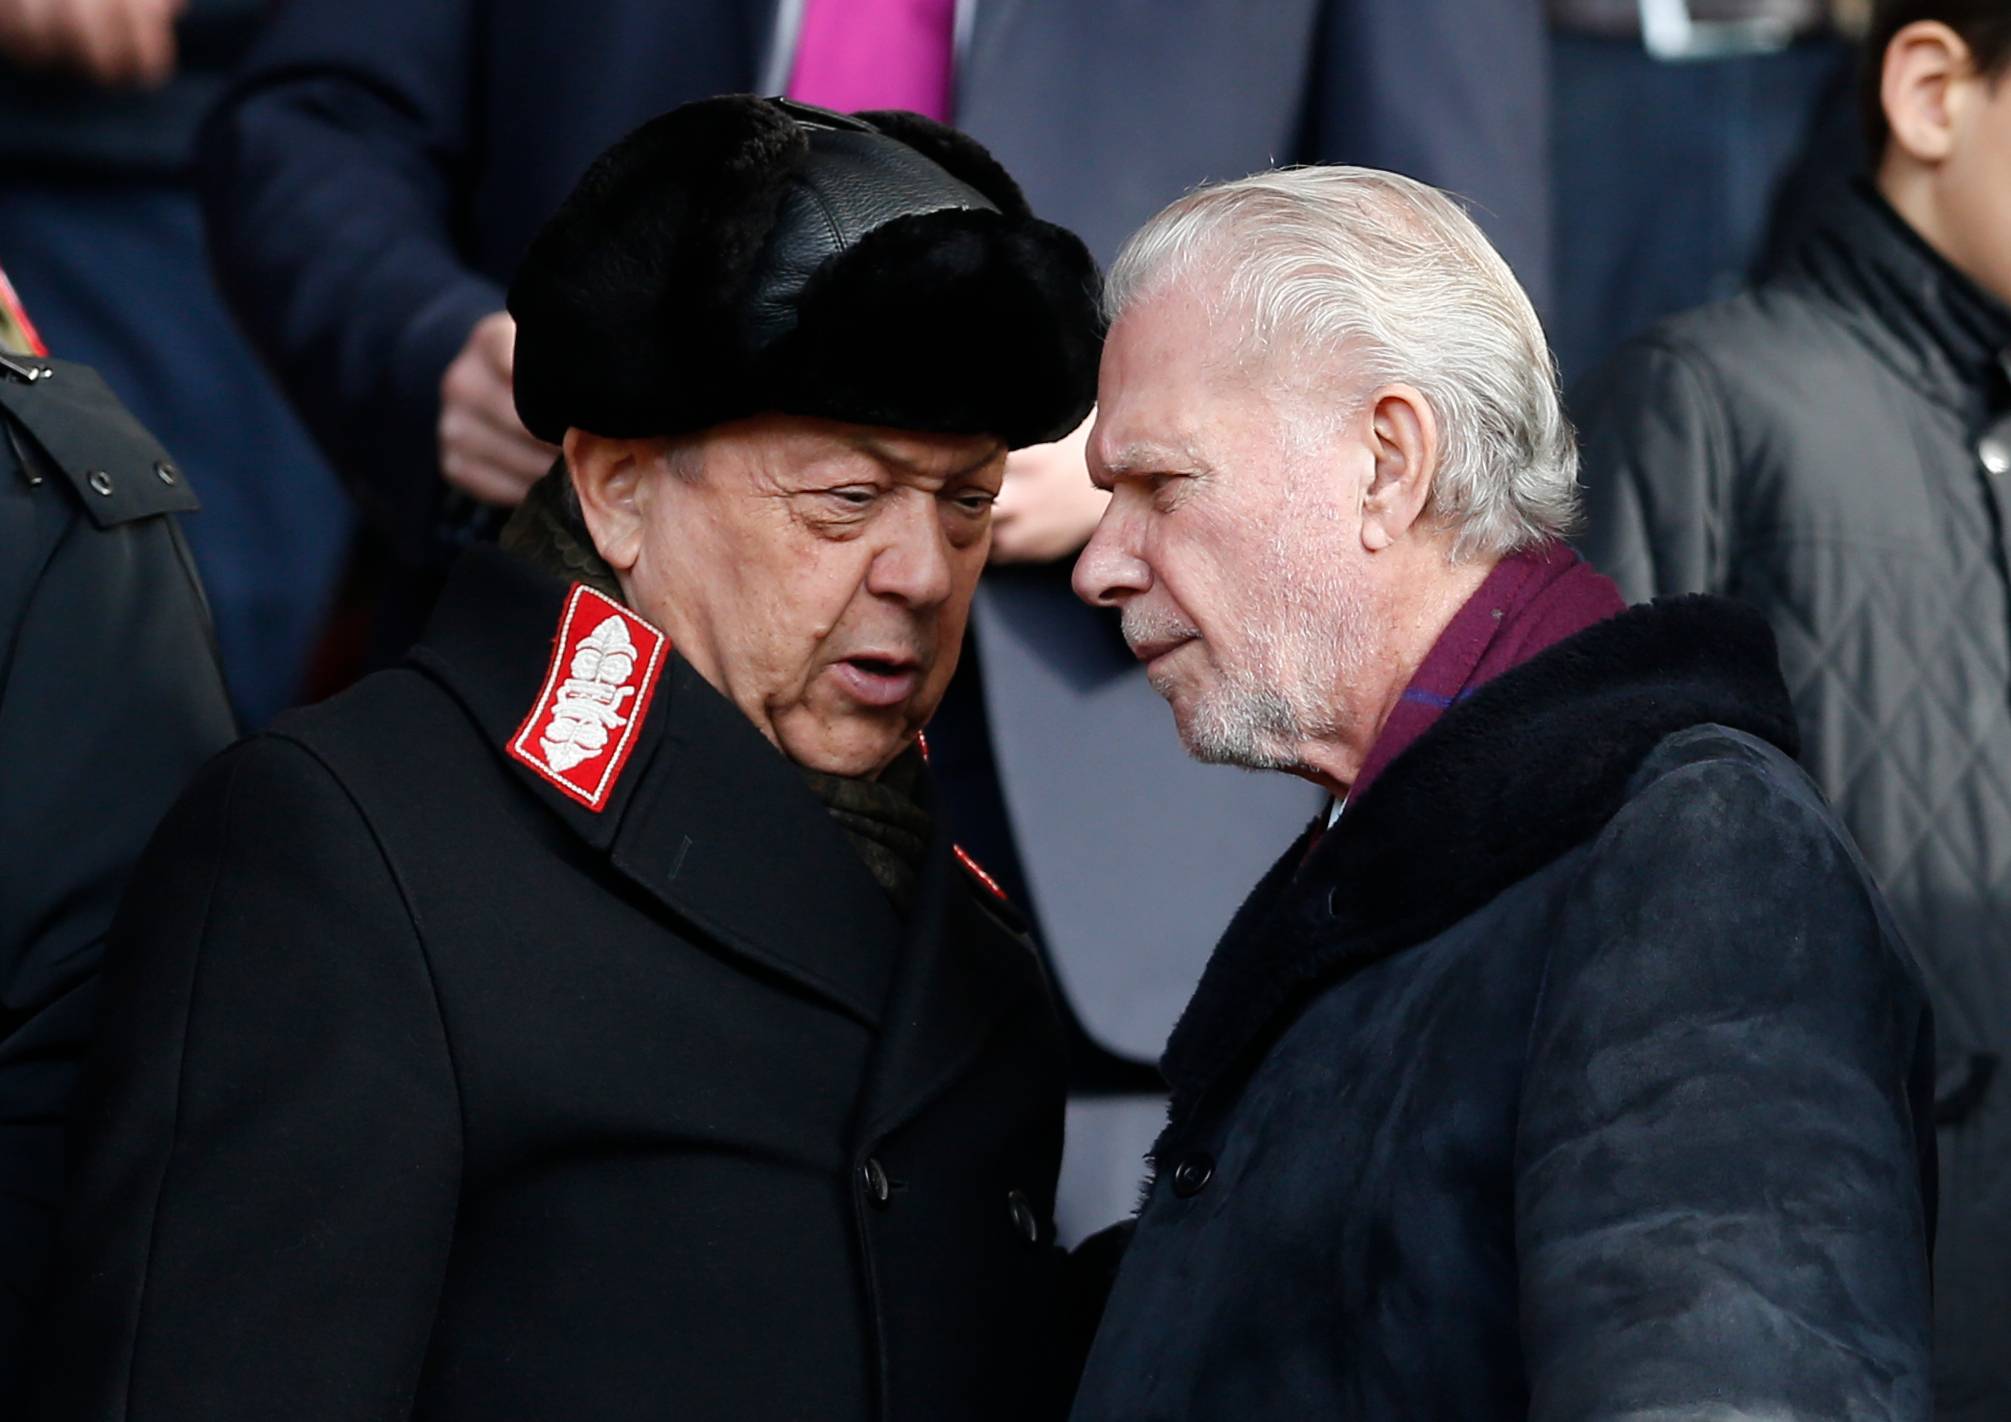 West Ham United co-owners David Sullivan and David Gold in conversation